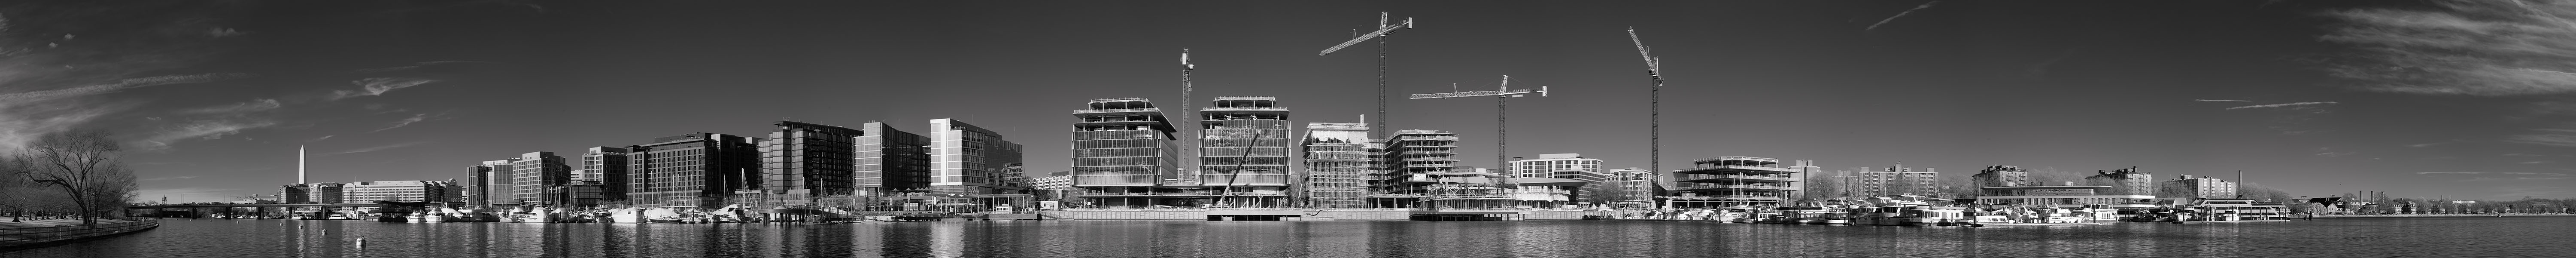 Extreme Infrared Panoramic Photo of Waterway, Marinas, Buildings, and Construction